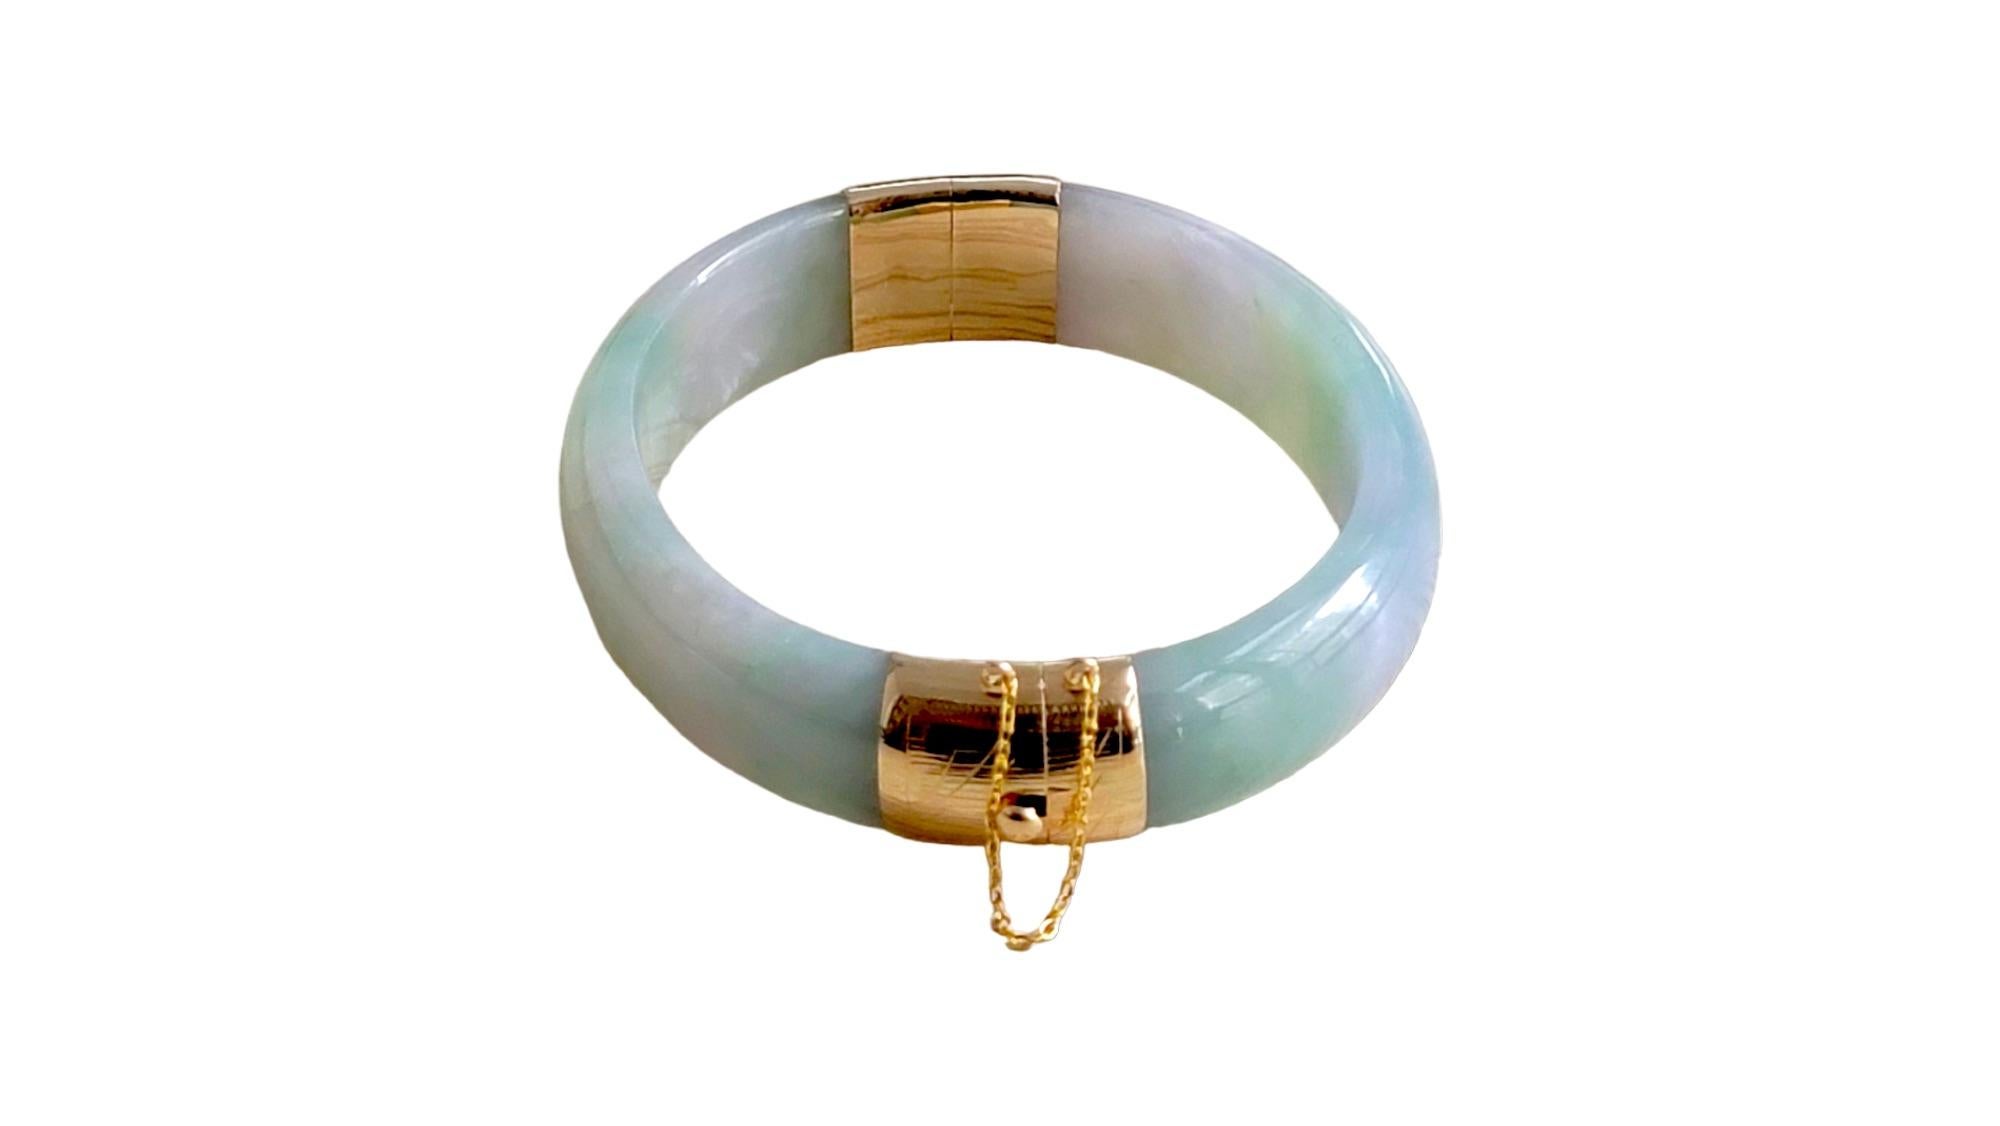 Viceroy's Elliptical Burmese A-Jade Bangle Bracelet (with 14K Gold) In New Condition For Sale In Kowloon, HK